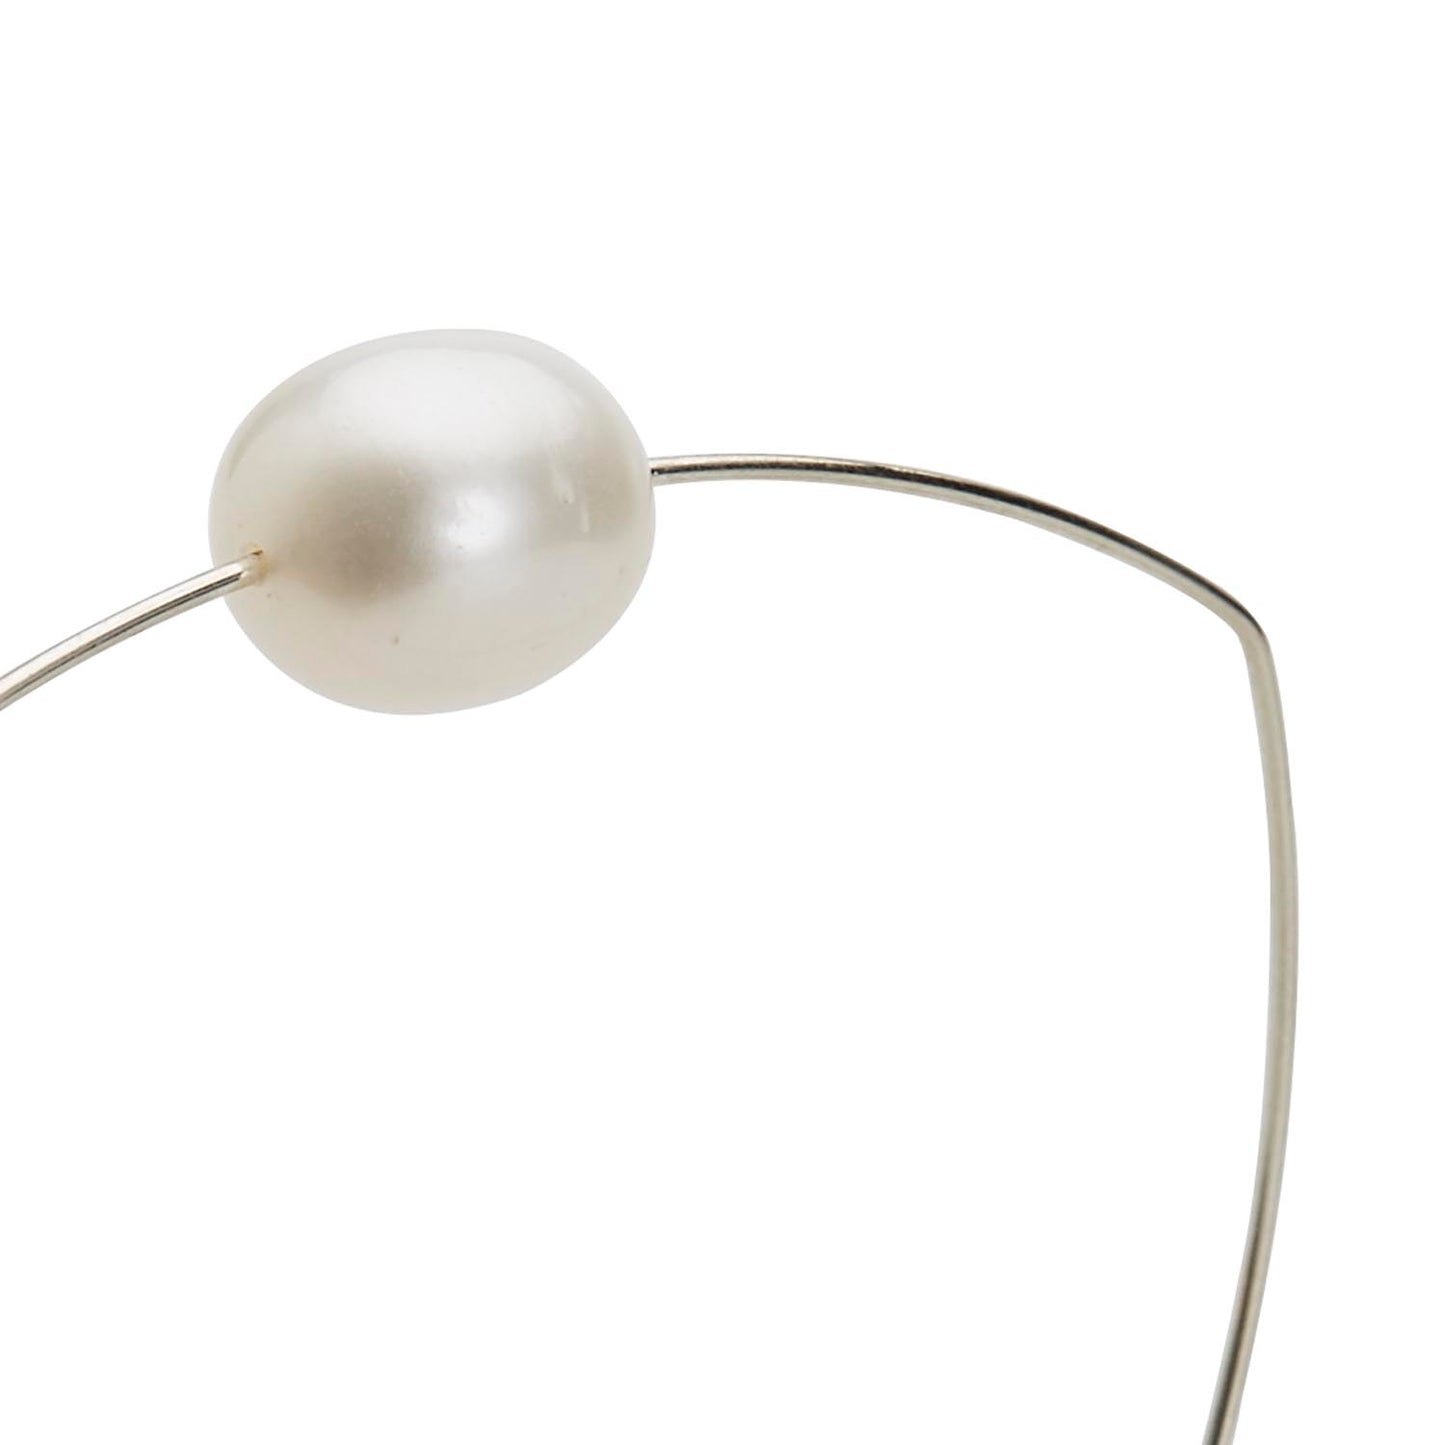 Triangle Bangle with White Oval Pearl